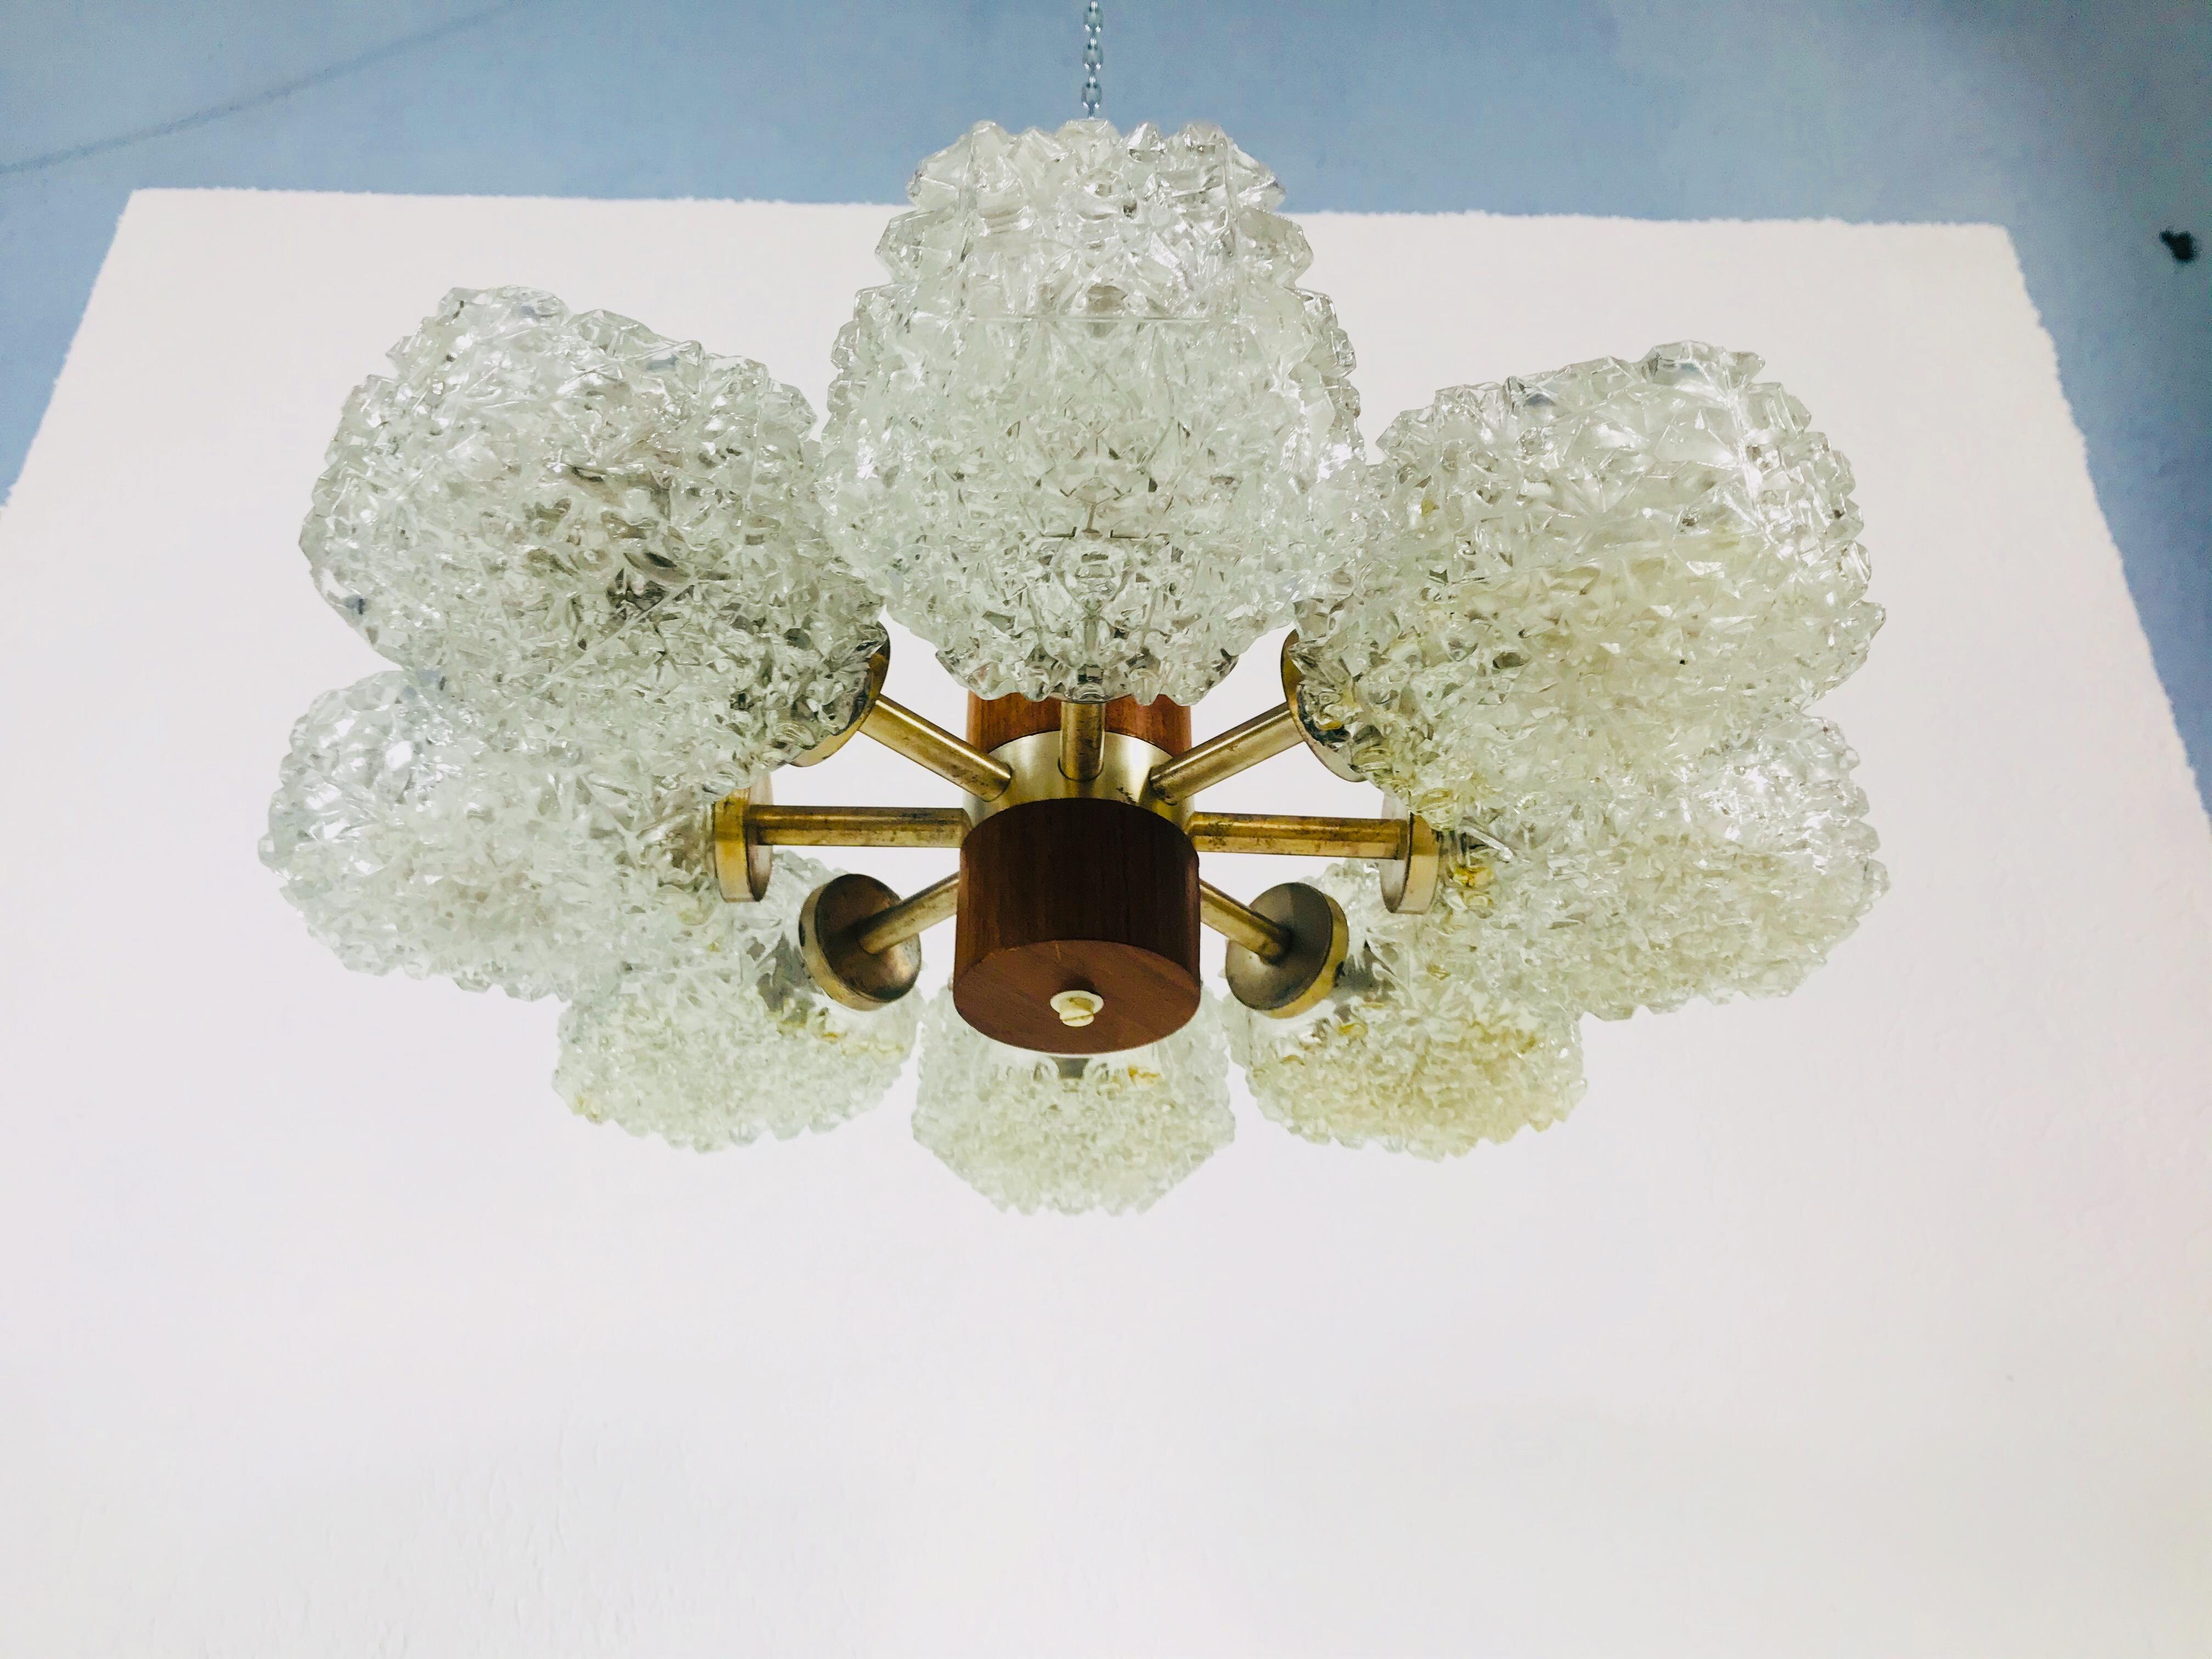 Temde teak and brass adjustable flush mount made in the 1960s. It is fascinating with its rare glass shapes which are adjustable. The eight arms are all made of polished brass.

Measurements:

Height: 18 cm

Diameter: 50 cm 

The light